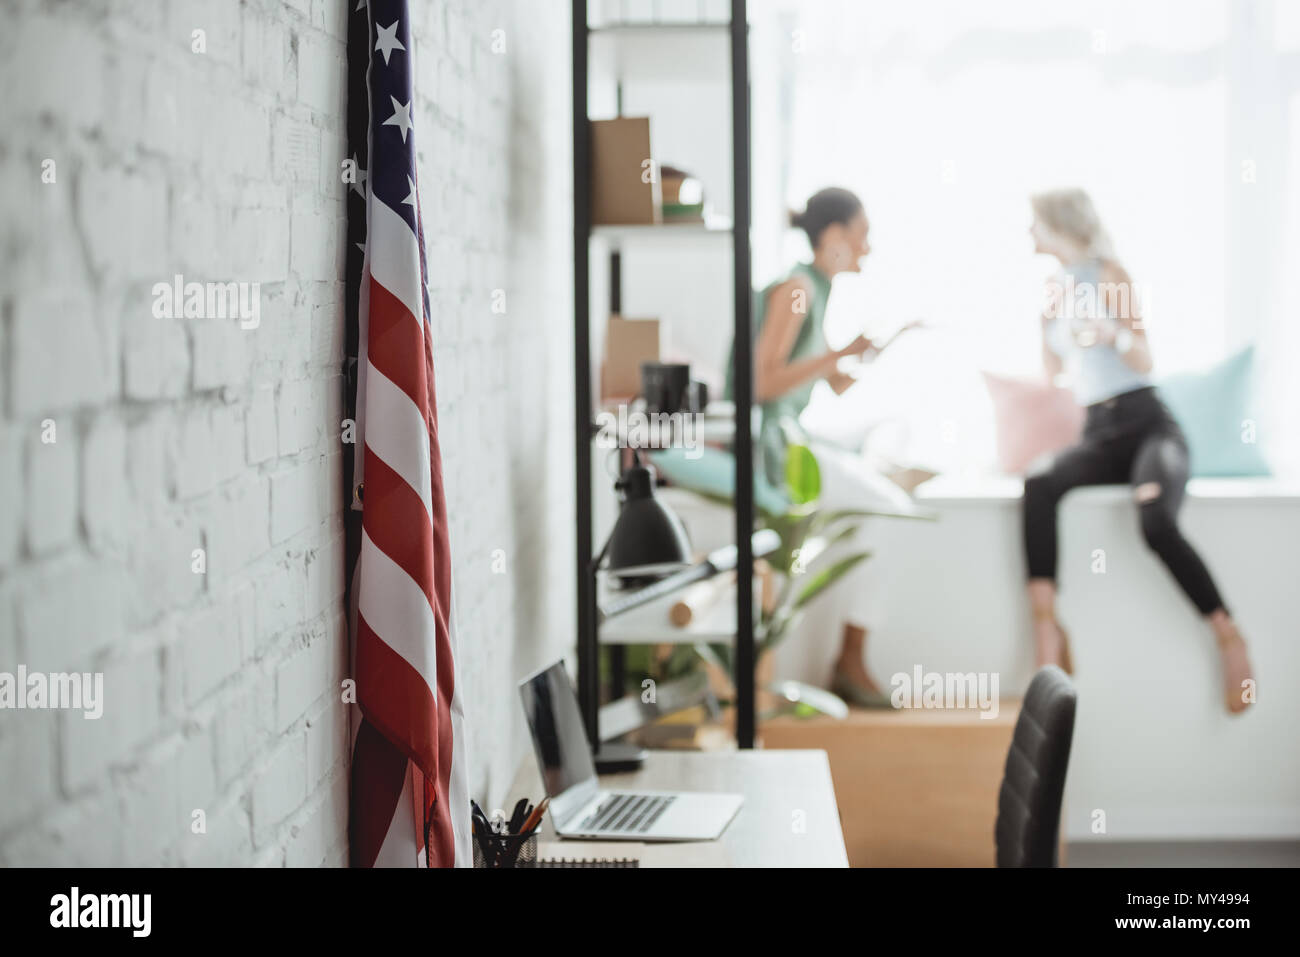 closeup shot of united states of america flag and two women on blurred background Stock Photo